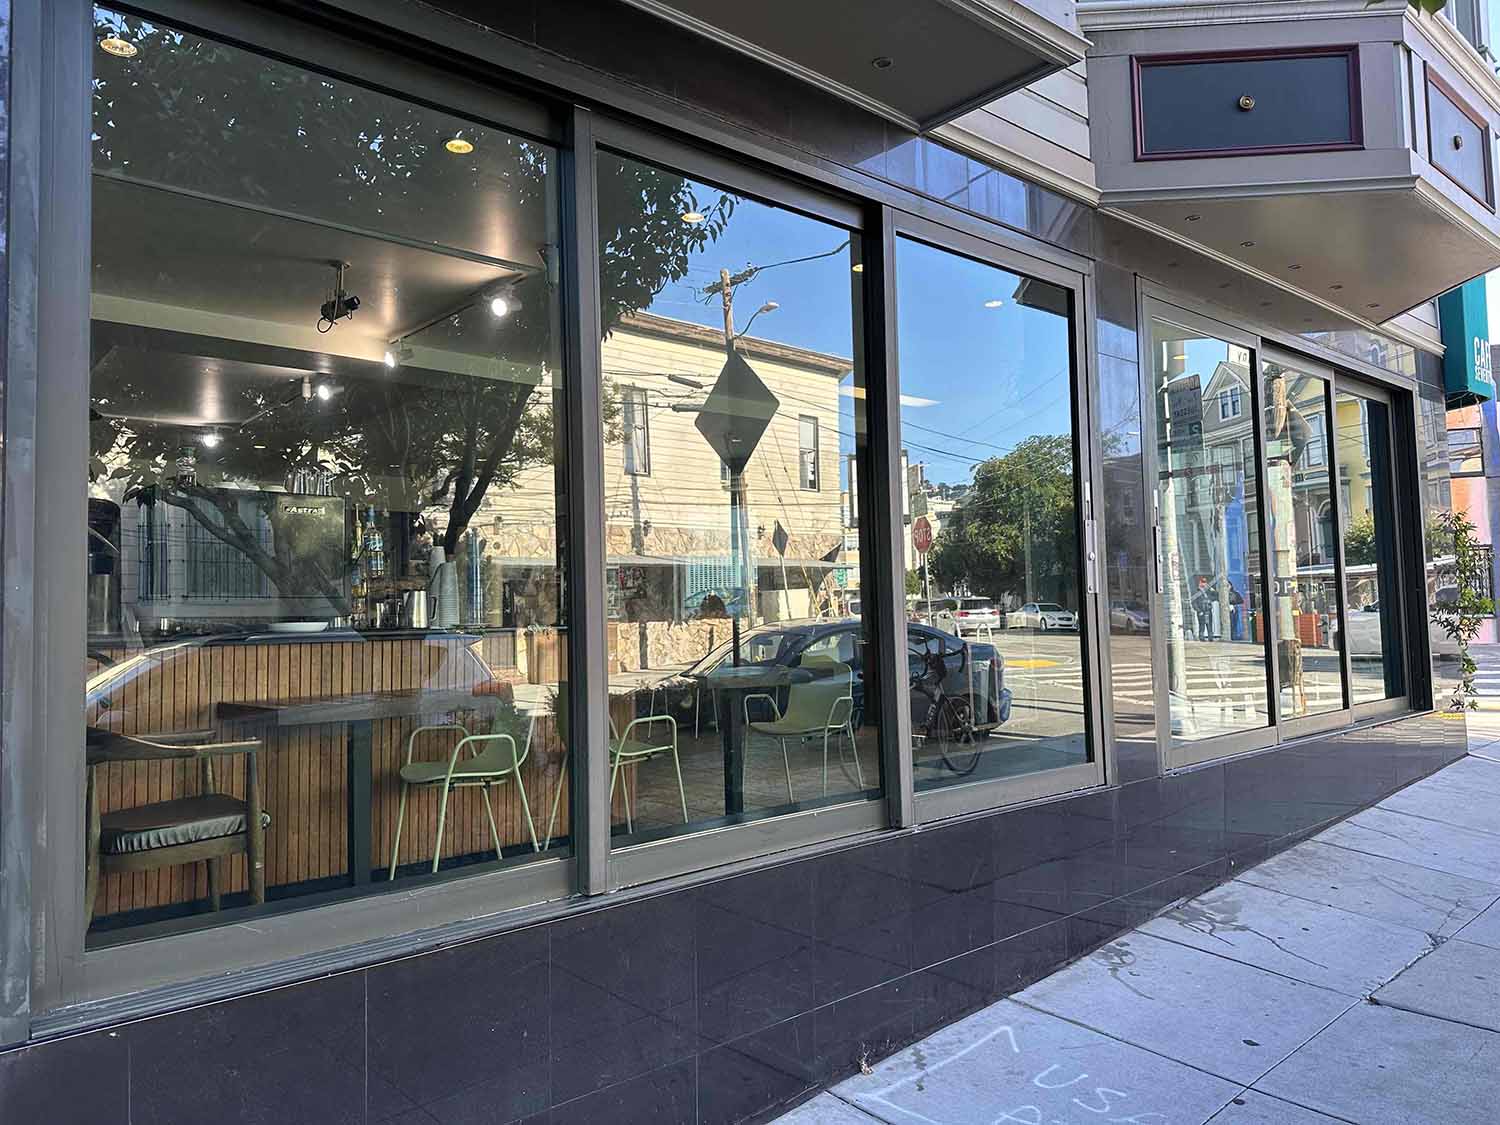 A San Francisco Cafe Gets 3M Security Window Film. Installed by ClimatePro, the Bay Area's best window film installation company.